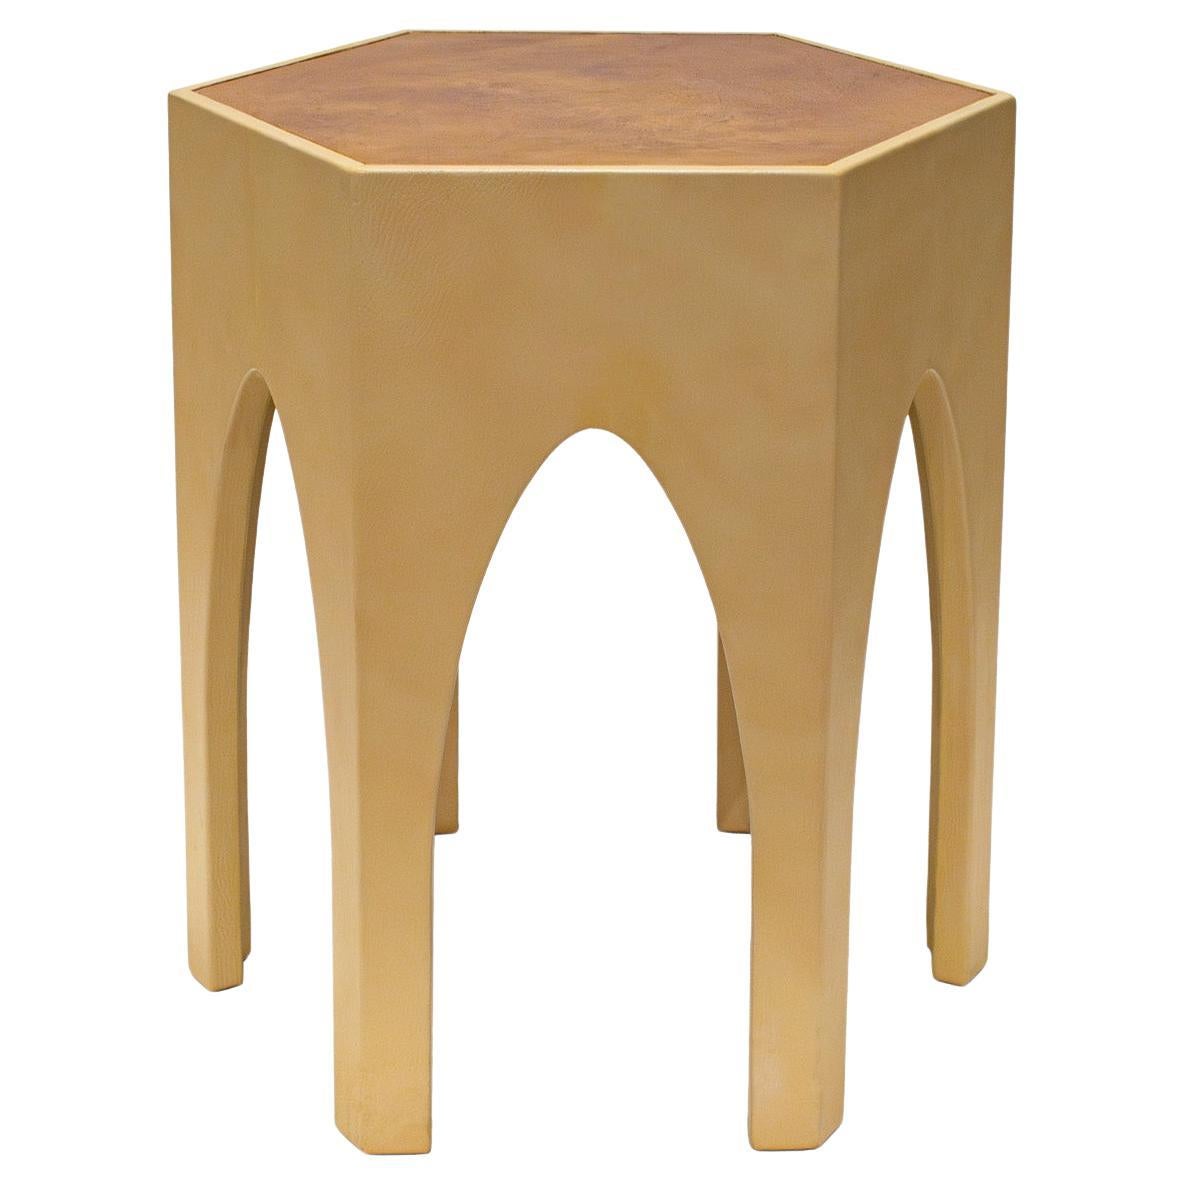 Karl Springer Prototype "Cathedral Table" in Leather 1976-1978 For Sale